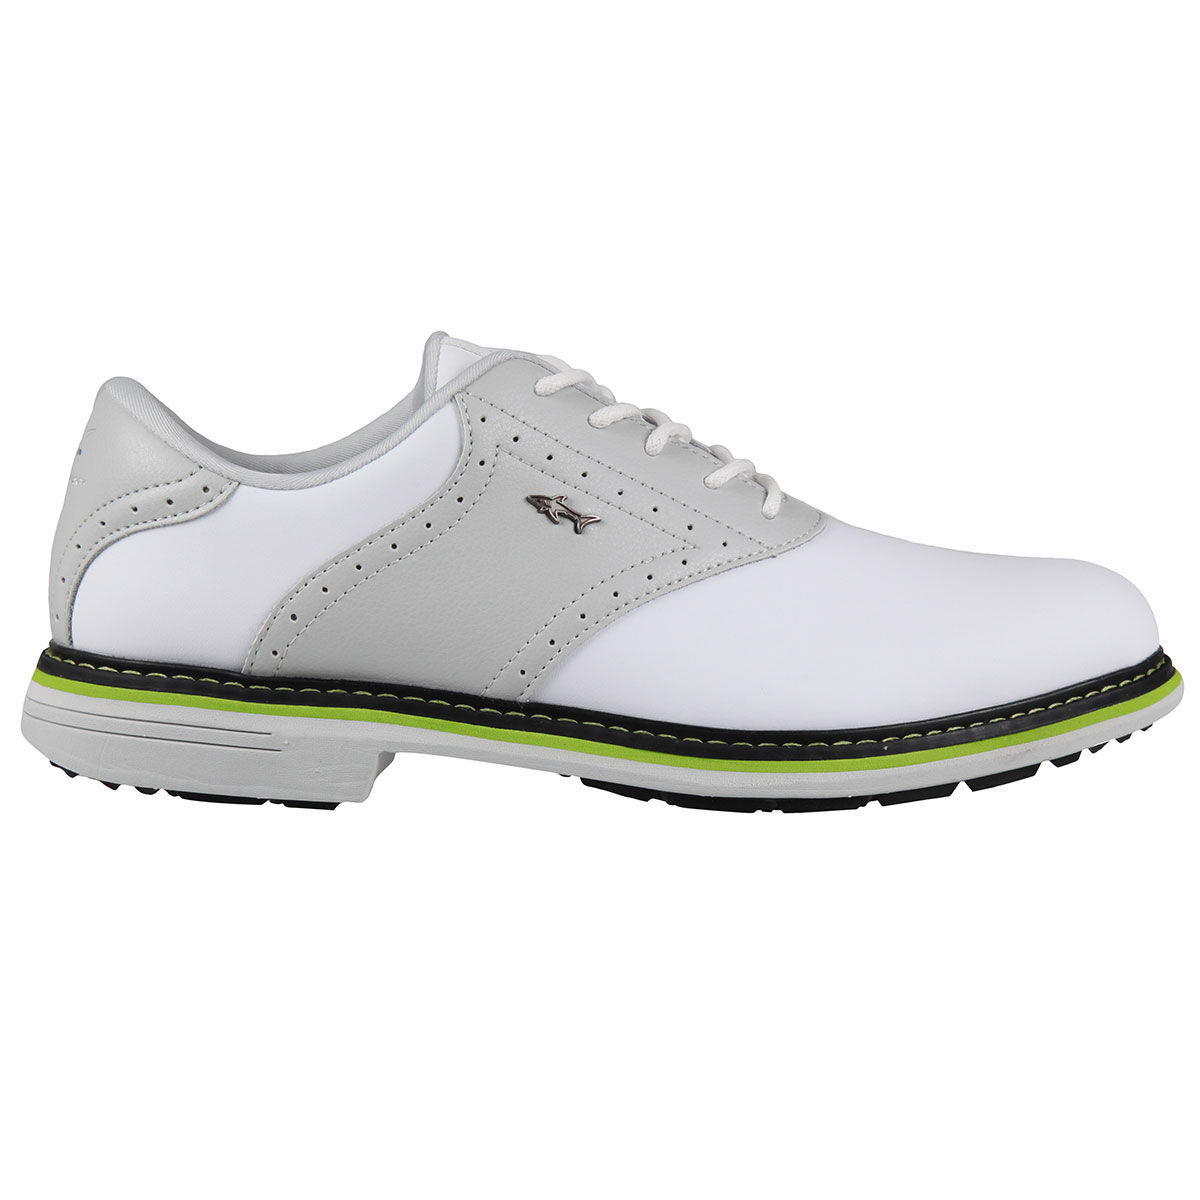 Greg Norman Men’s Isa Tour 2 Waterproof Spikeless Golf Shoes, Mens, White/grey/lime, 7 | American Golf